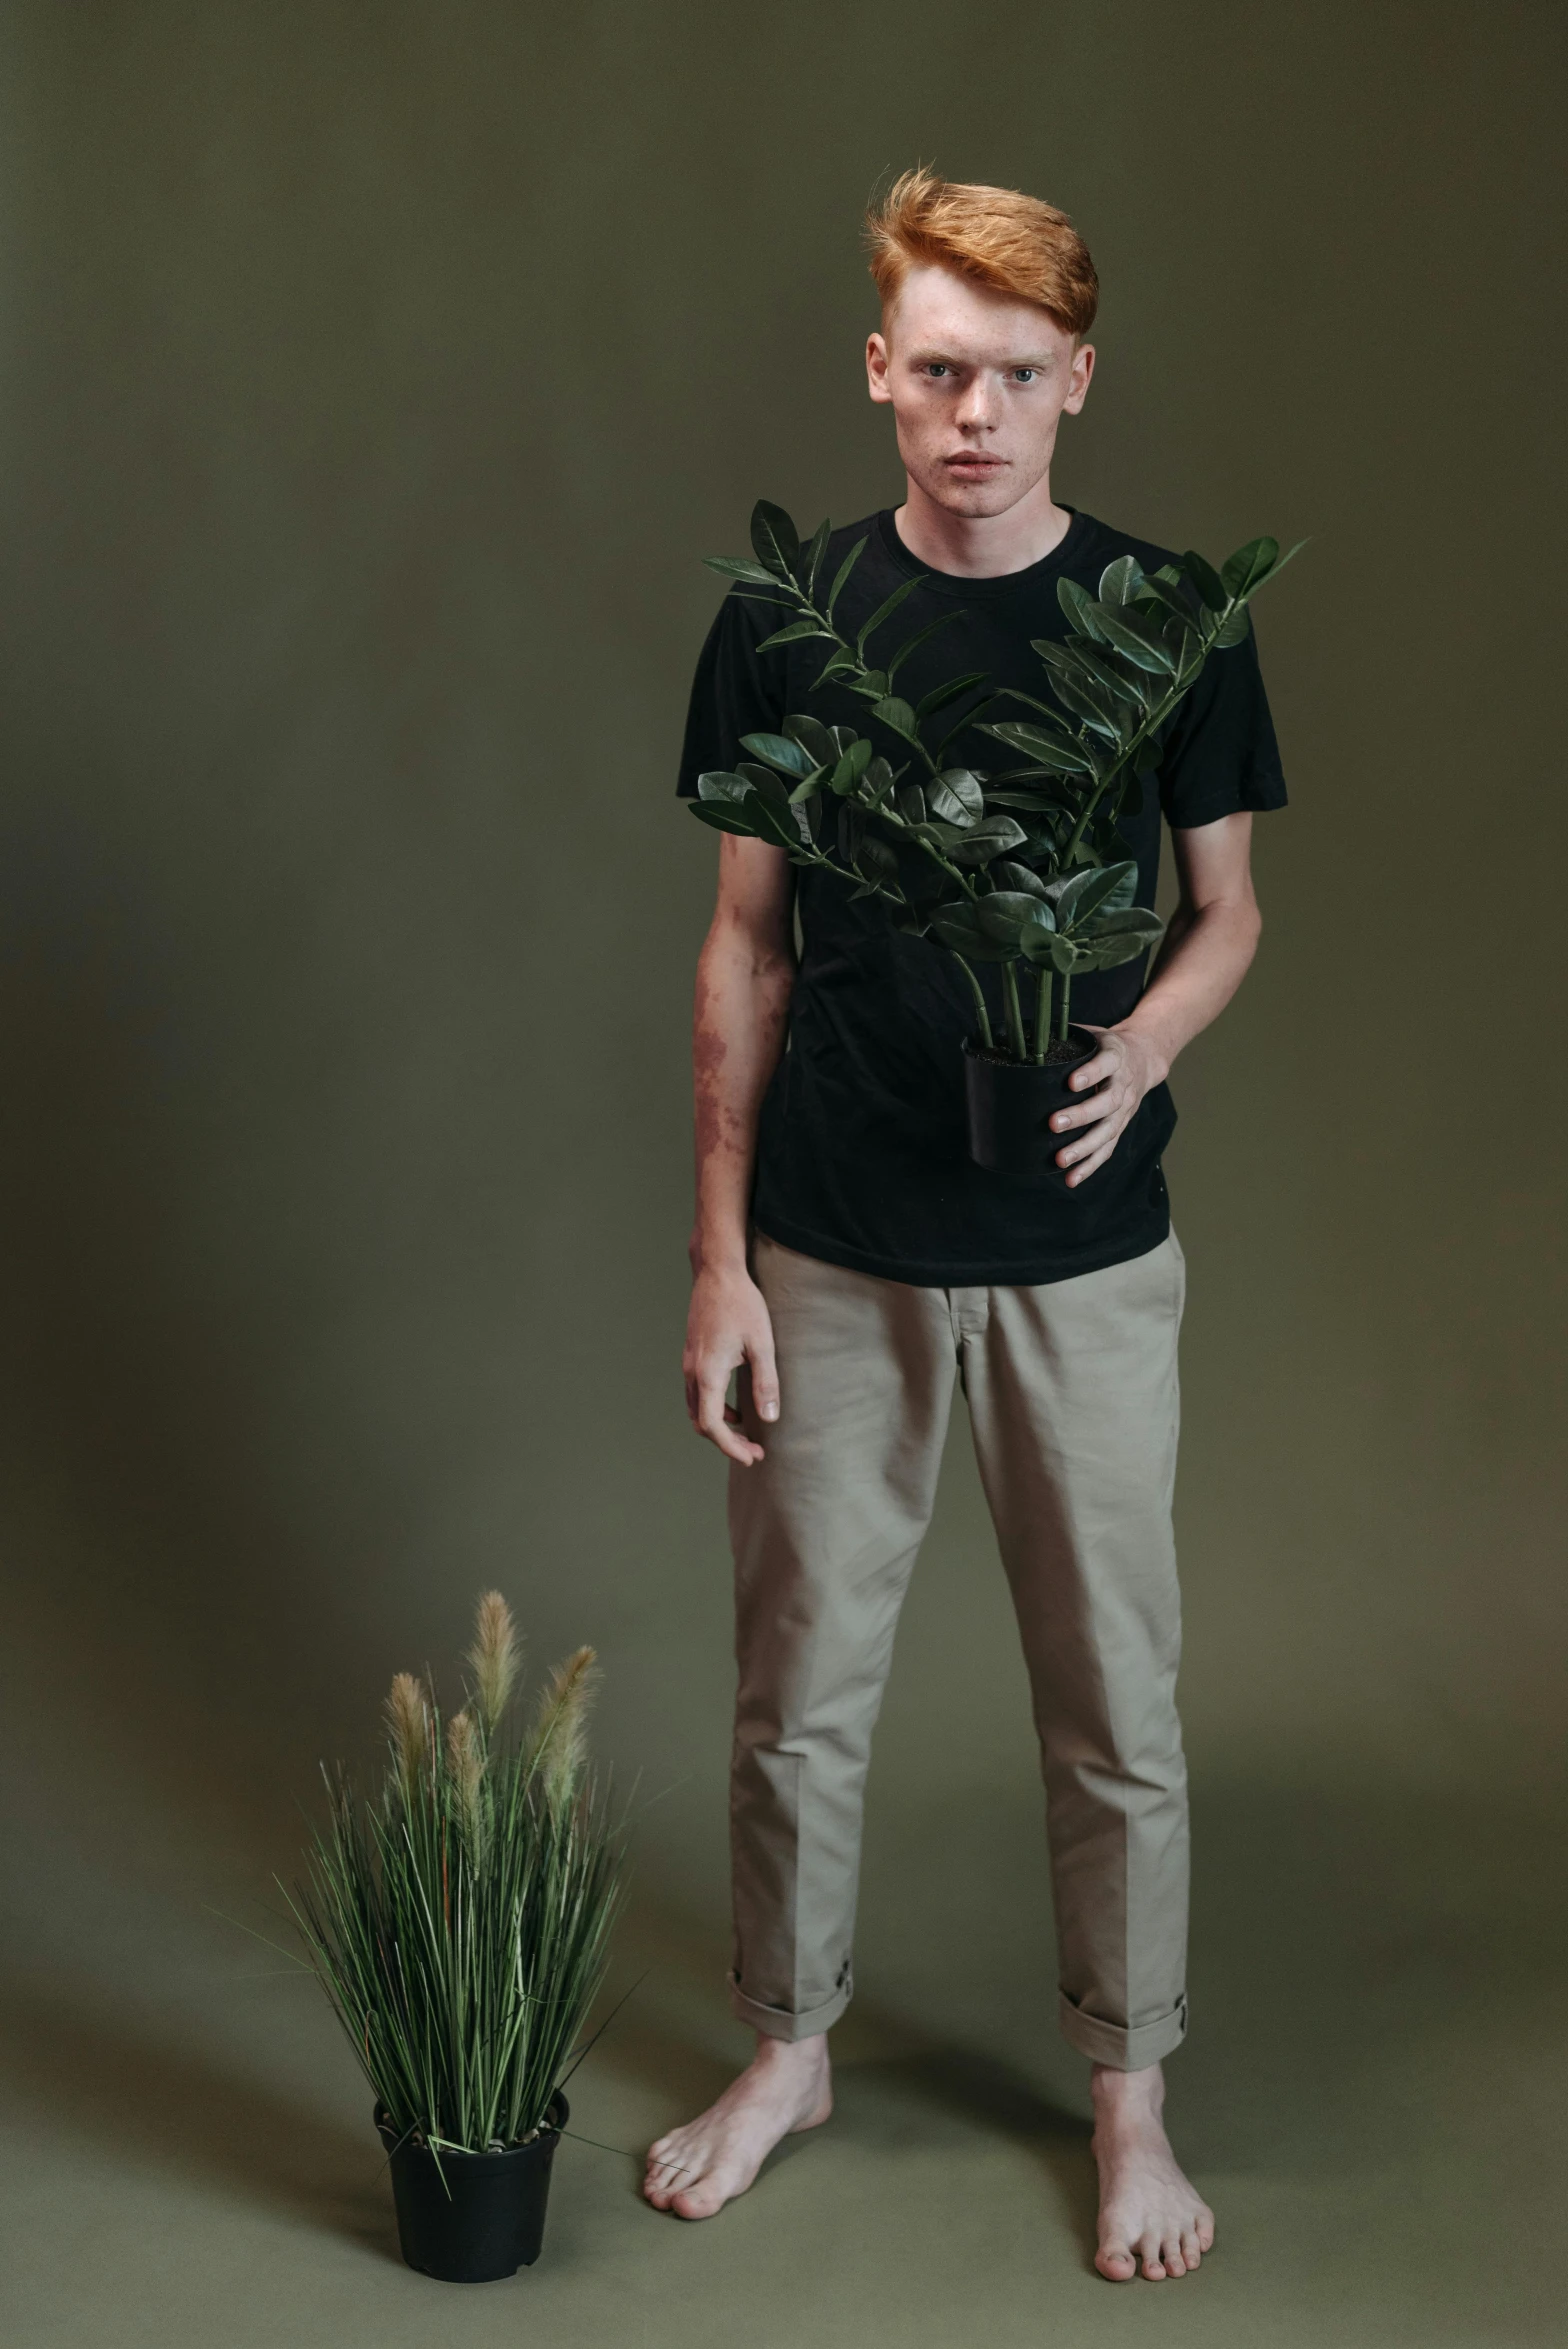 a man standing next to a potted plant, trending on unsplash, fullbody portrait, tommy 1 6 years old, studio photo, greens)